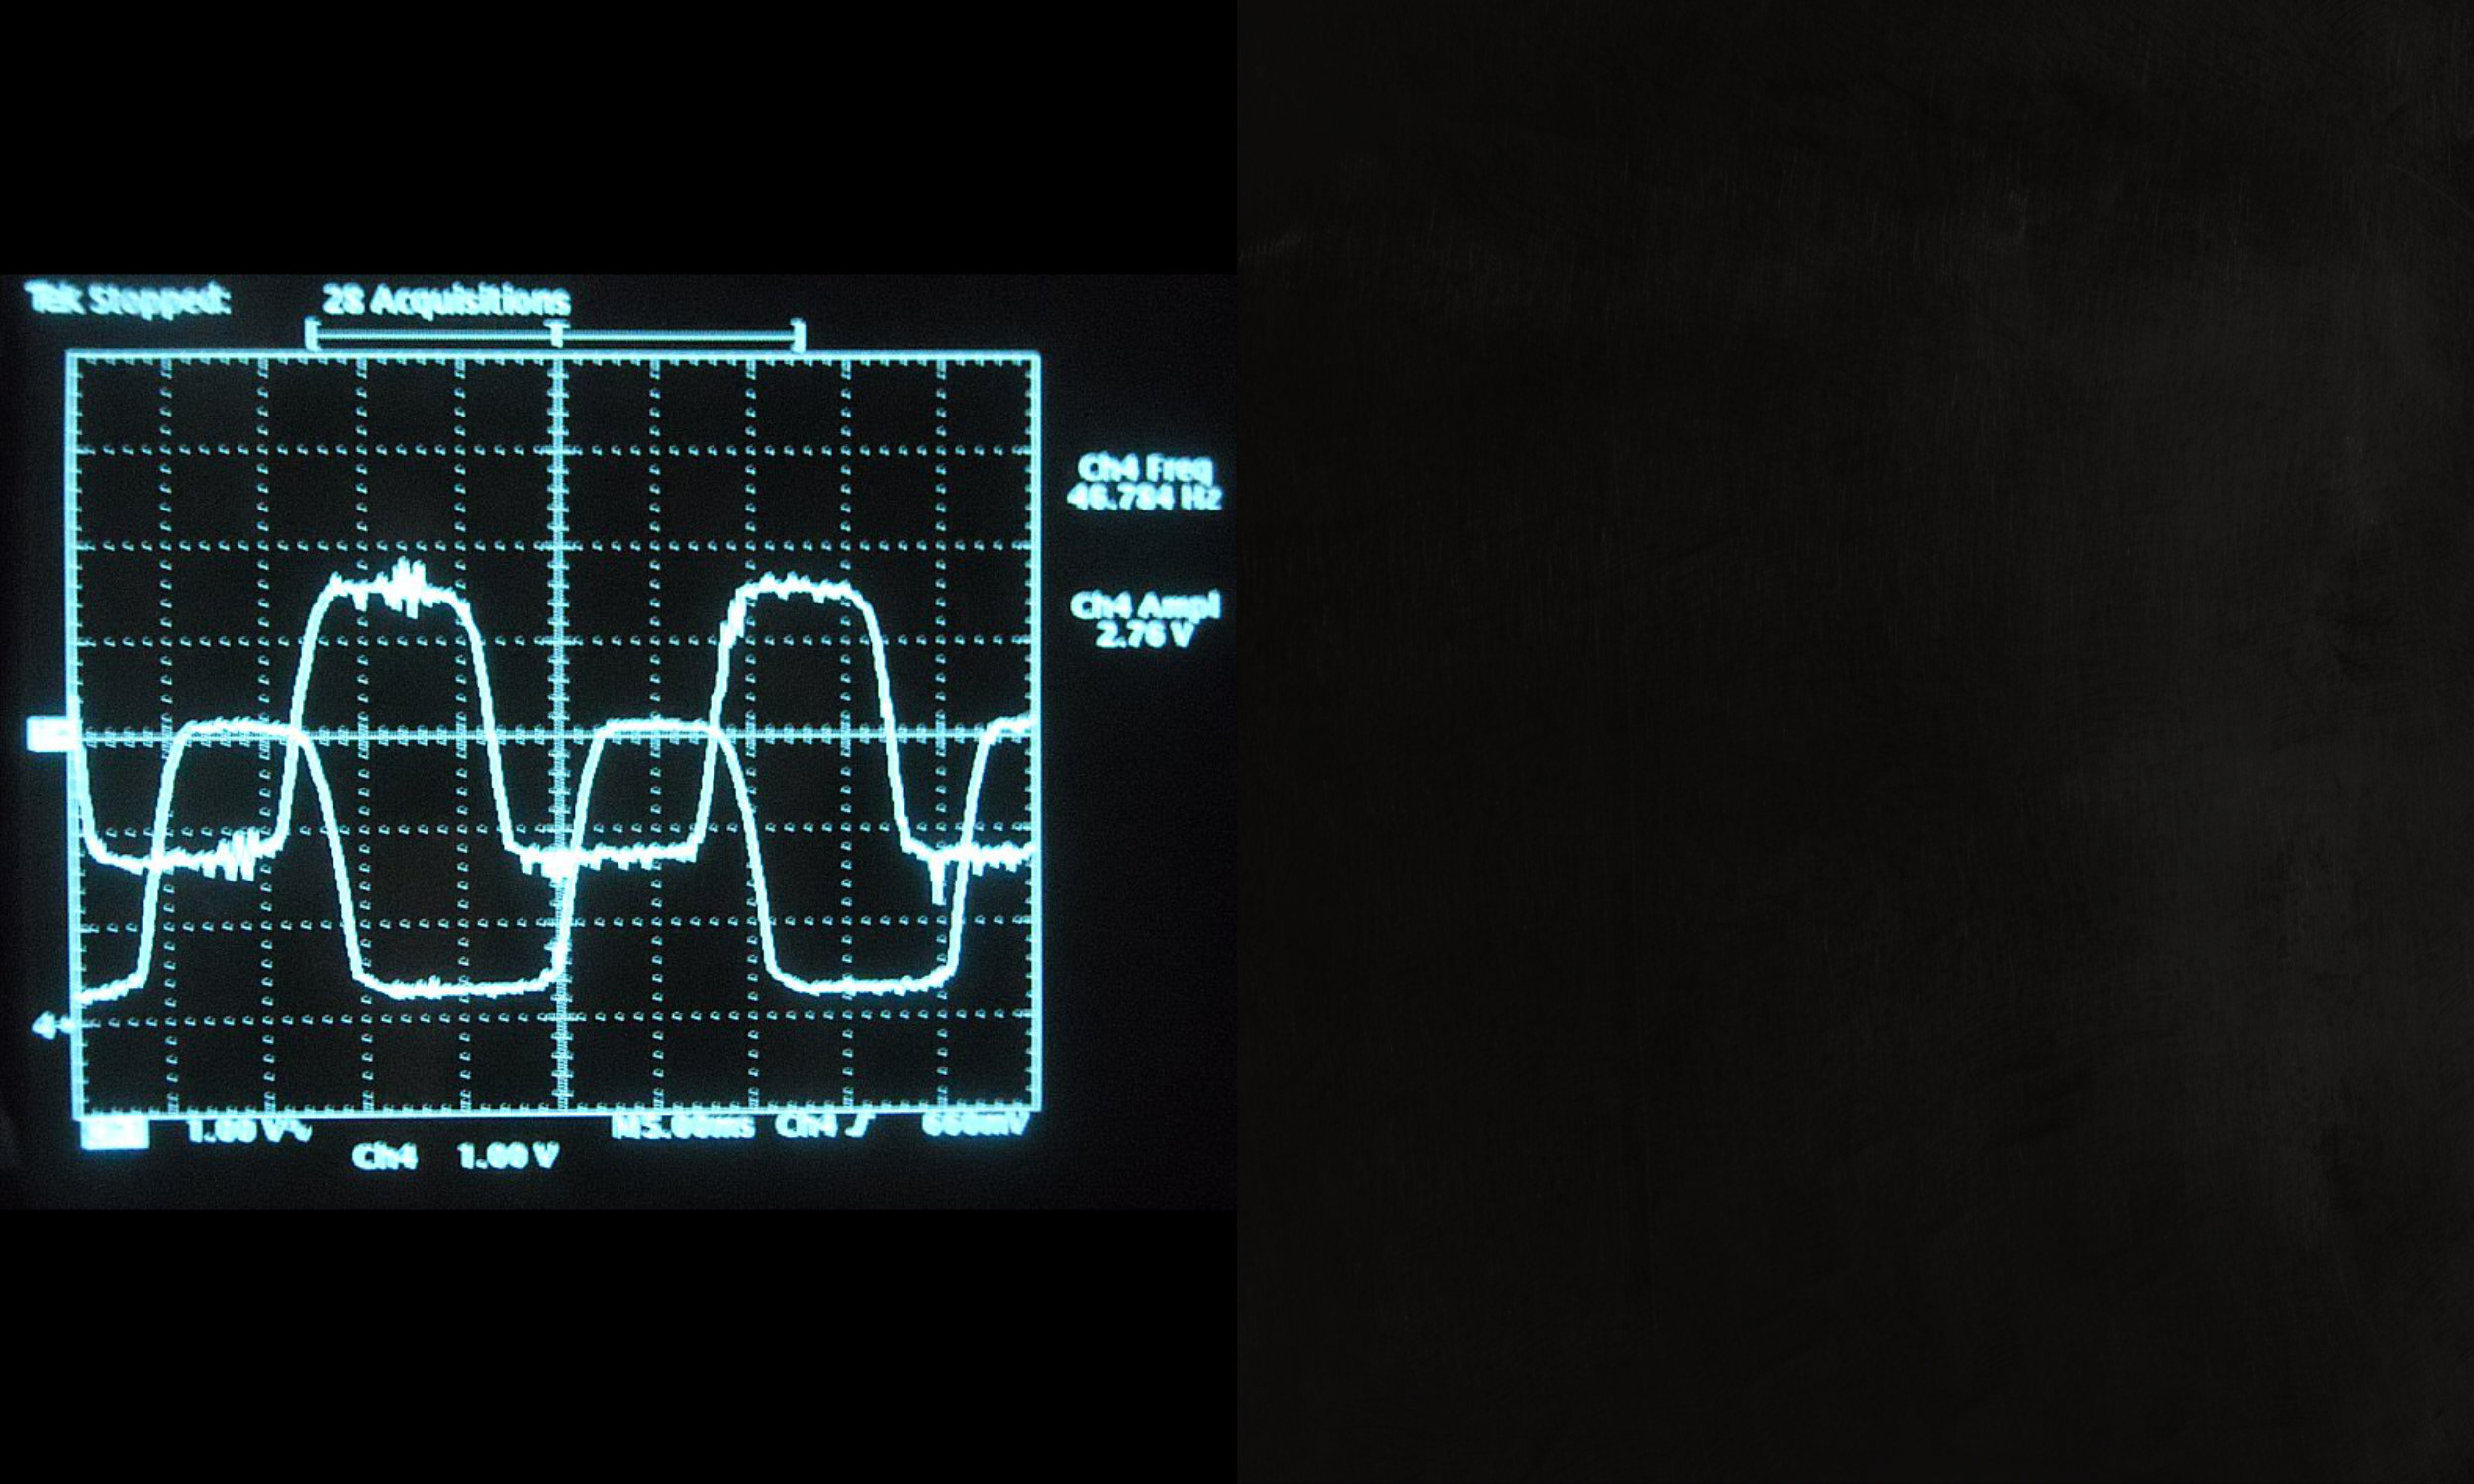  At left is an example of the two pulse trains (in phase and quadrature) that show how far the weight stack moves and in what direction, as seen on an oscilloscope screen. 